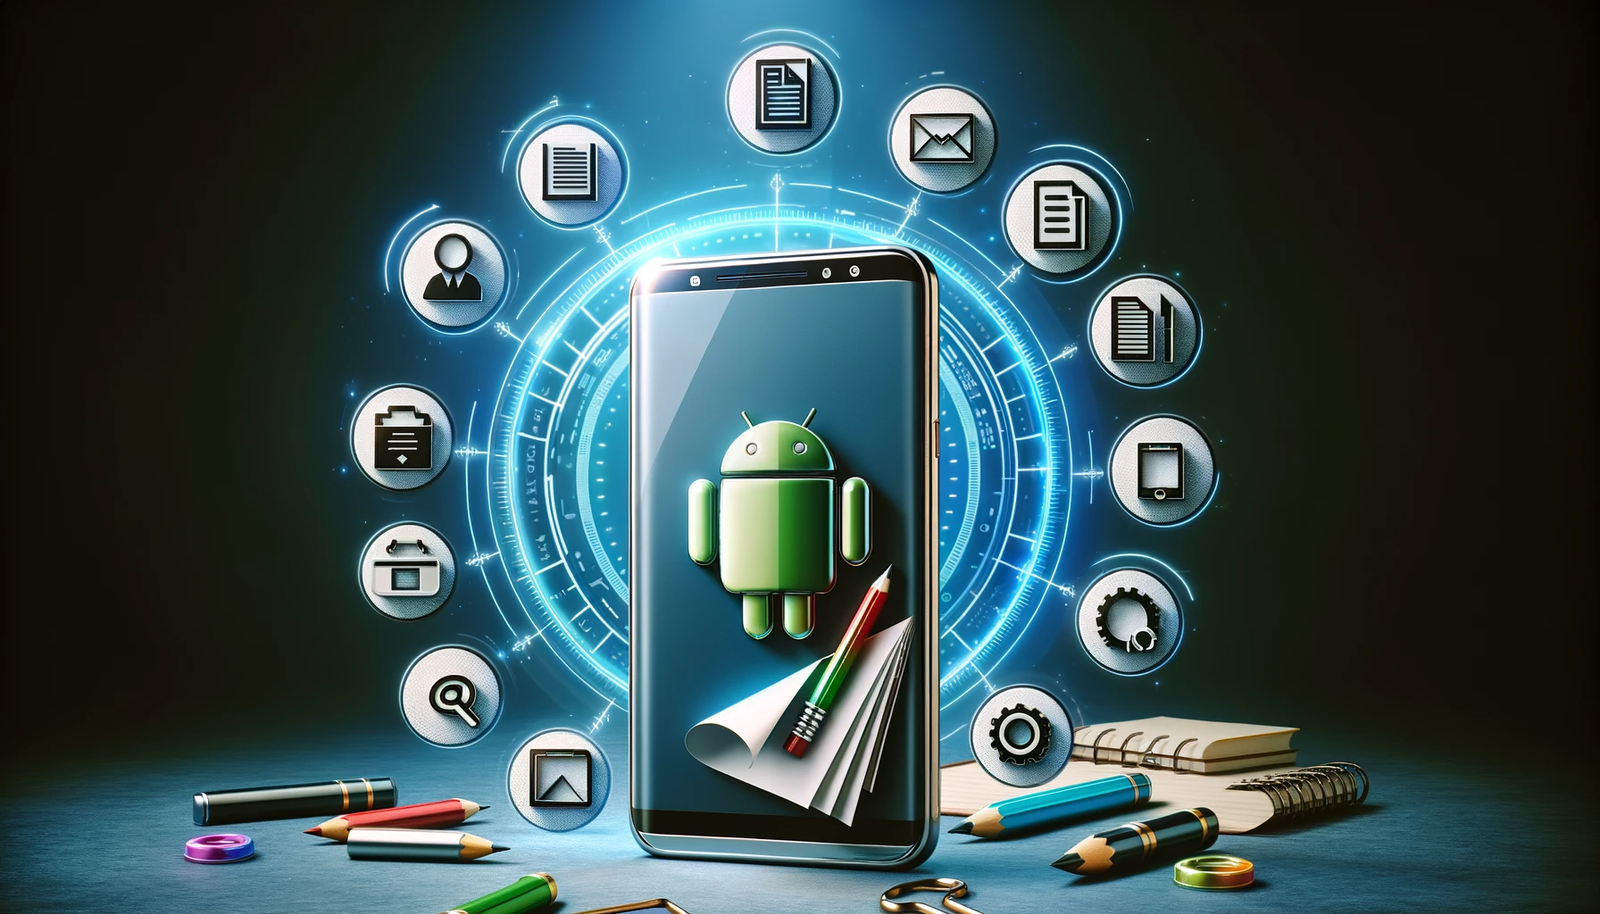 Top 10 Productivity Android Apps for Document Editing and Creation